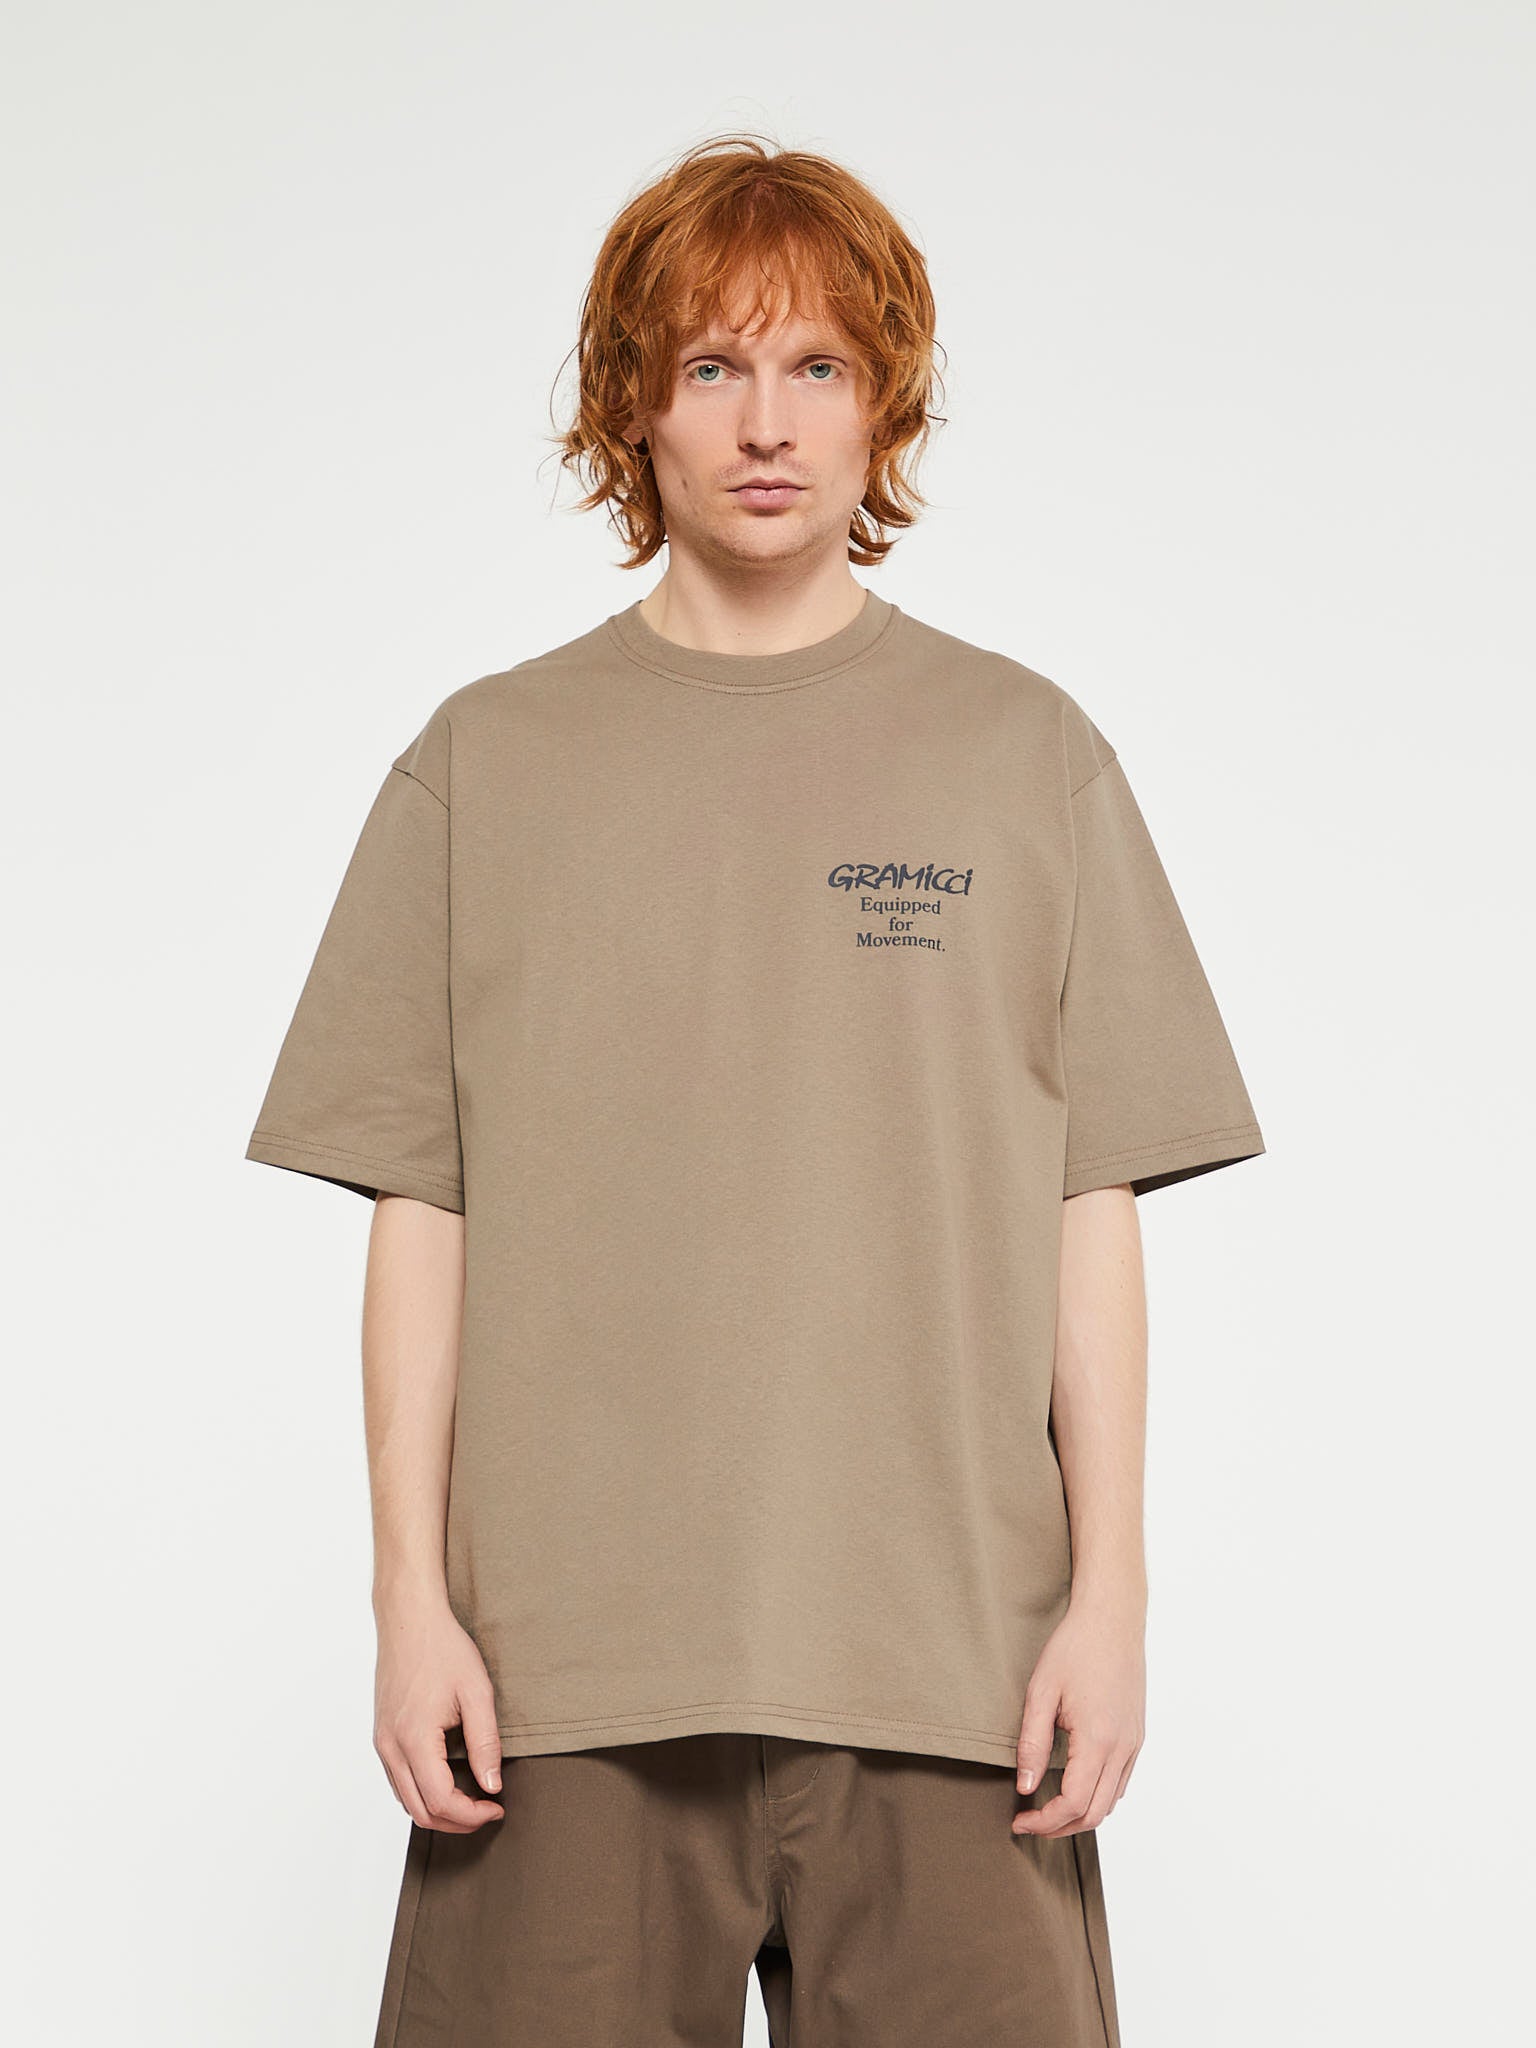 Gramicci - Equipped T-Shirt in Brown